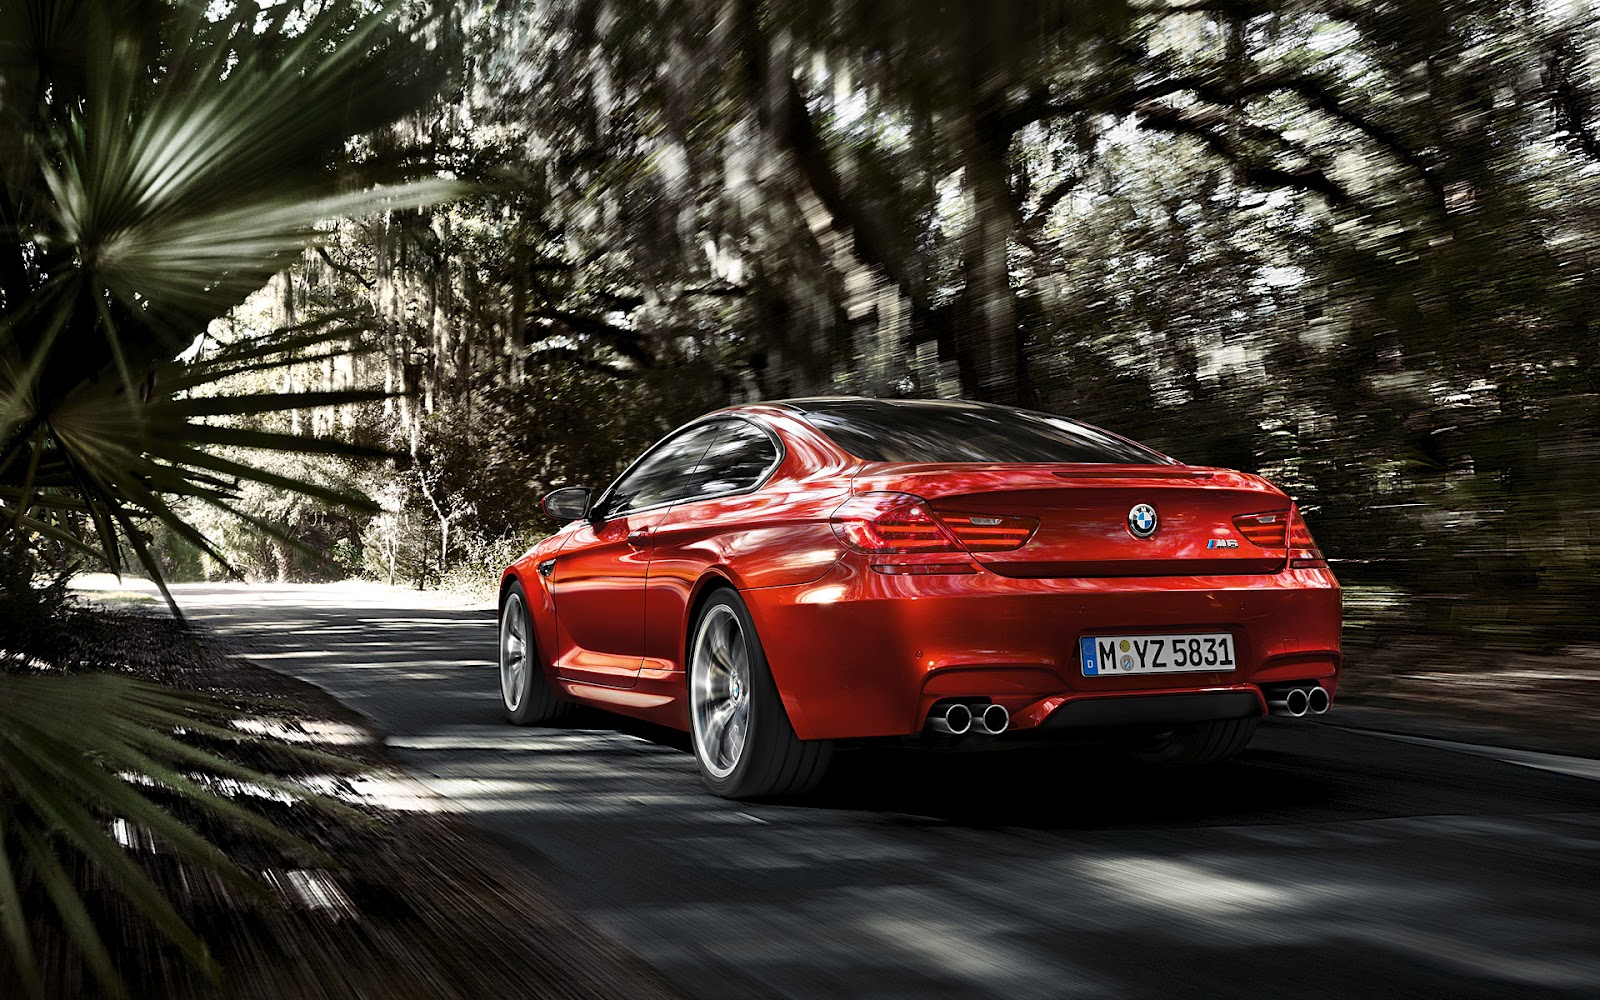 The BMW M6 Convertible Wallpapers For PC ~ BMW Automobiles